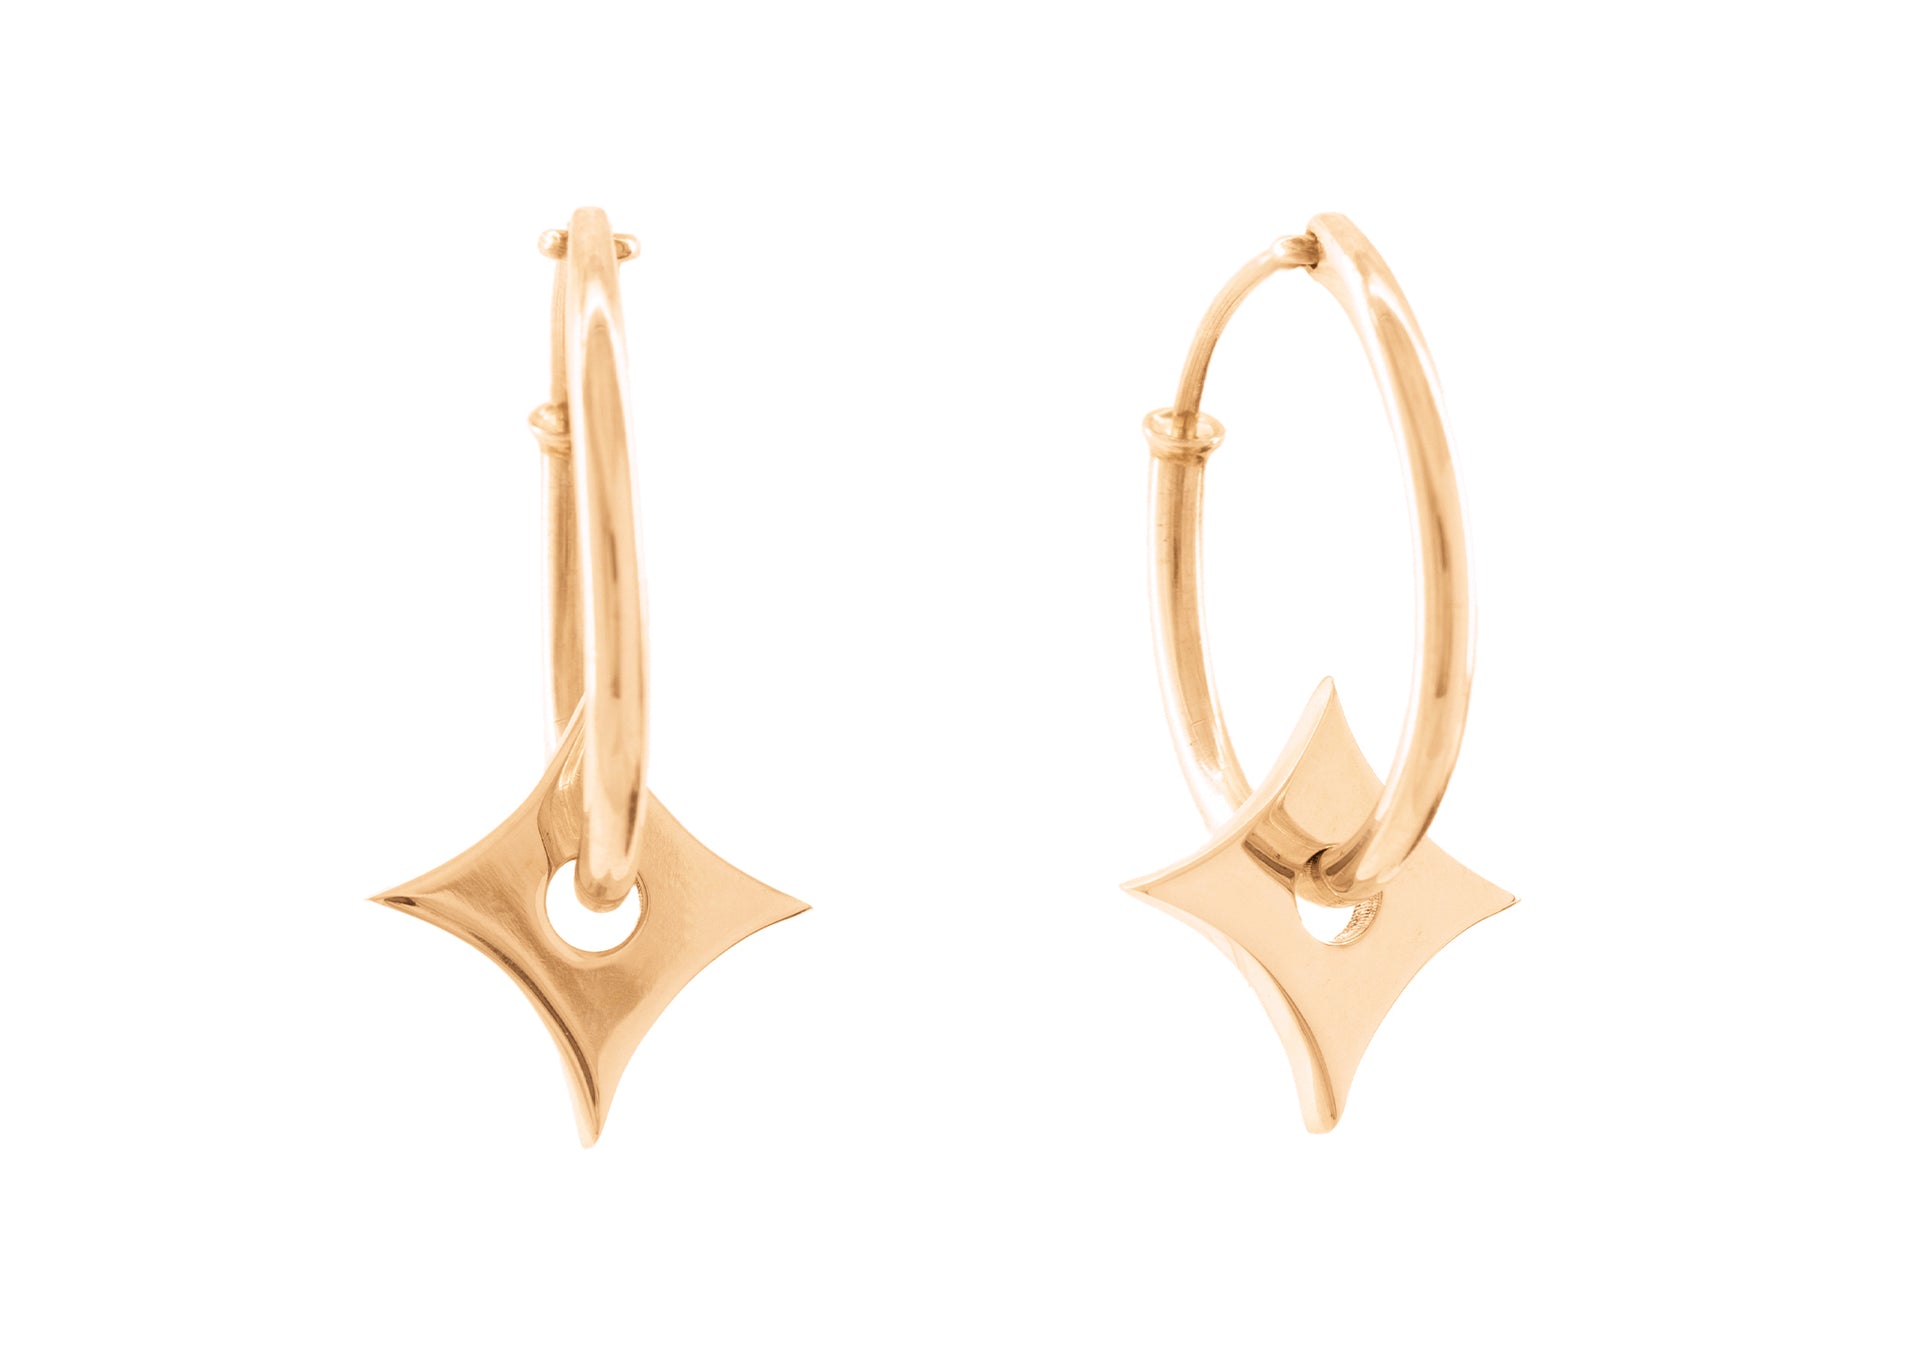 E29 Four-Point Concave Star Earring, Red Gold